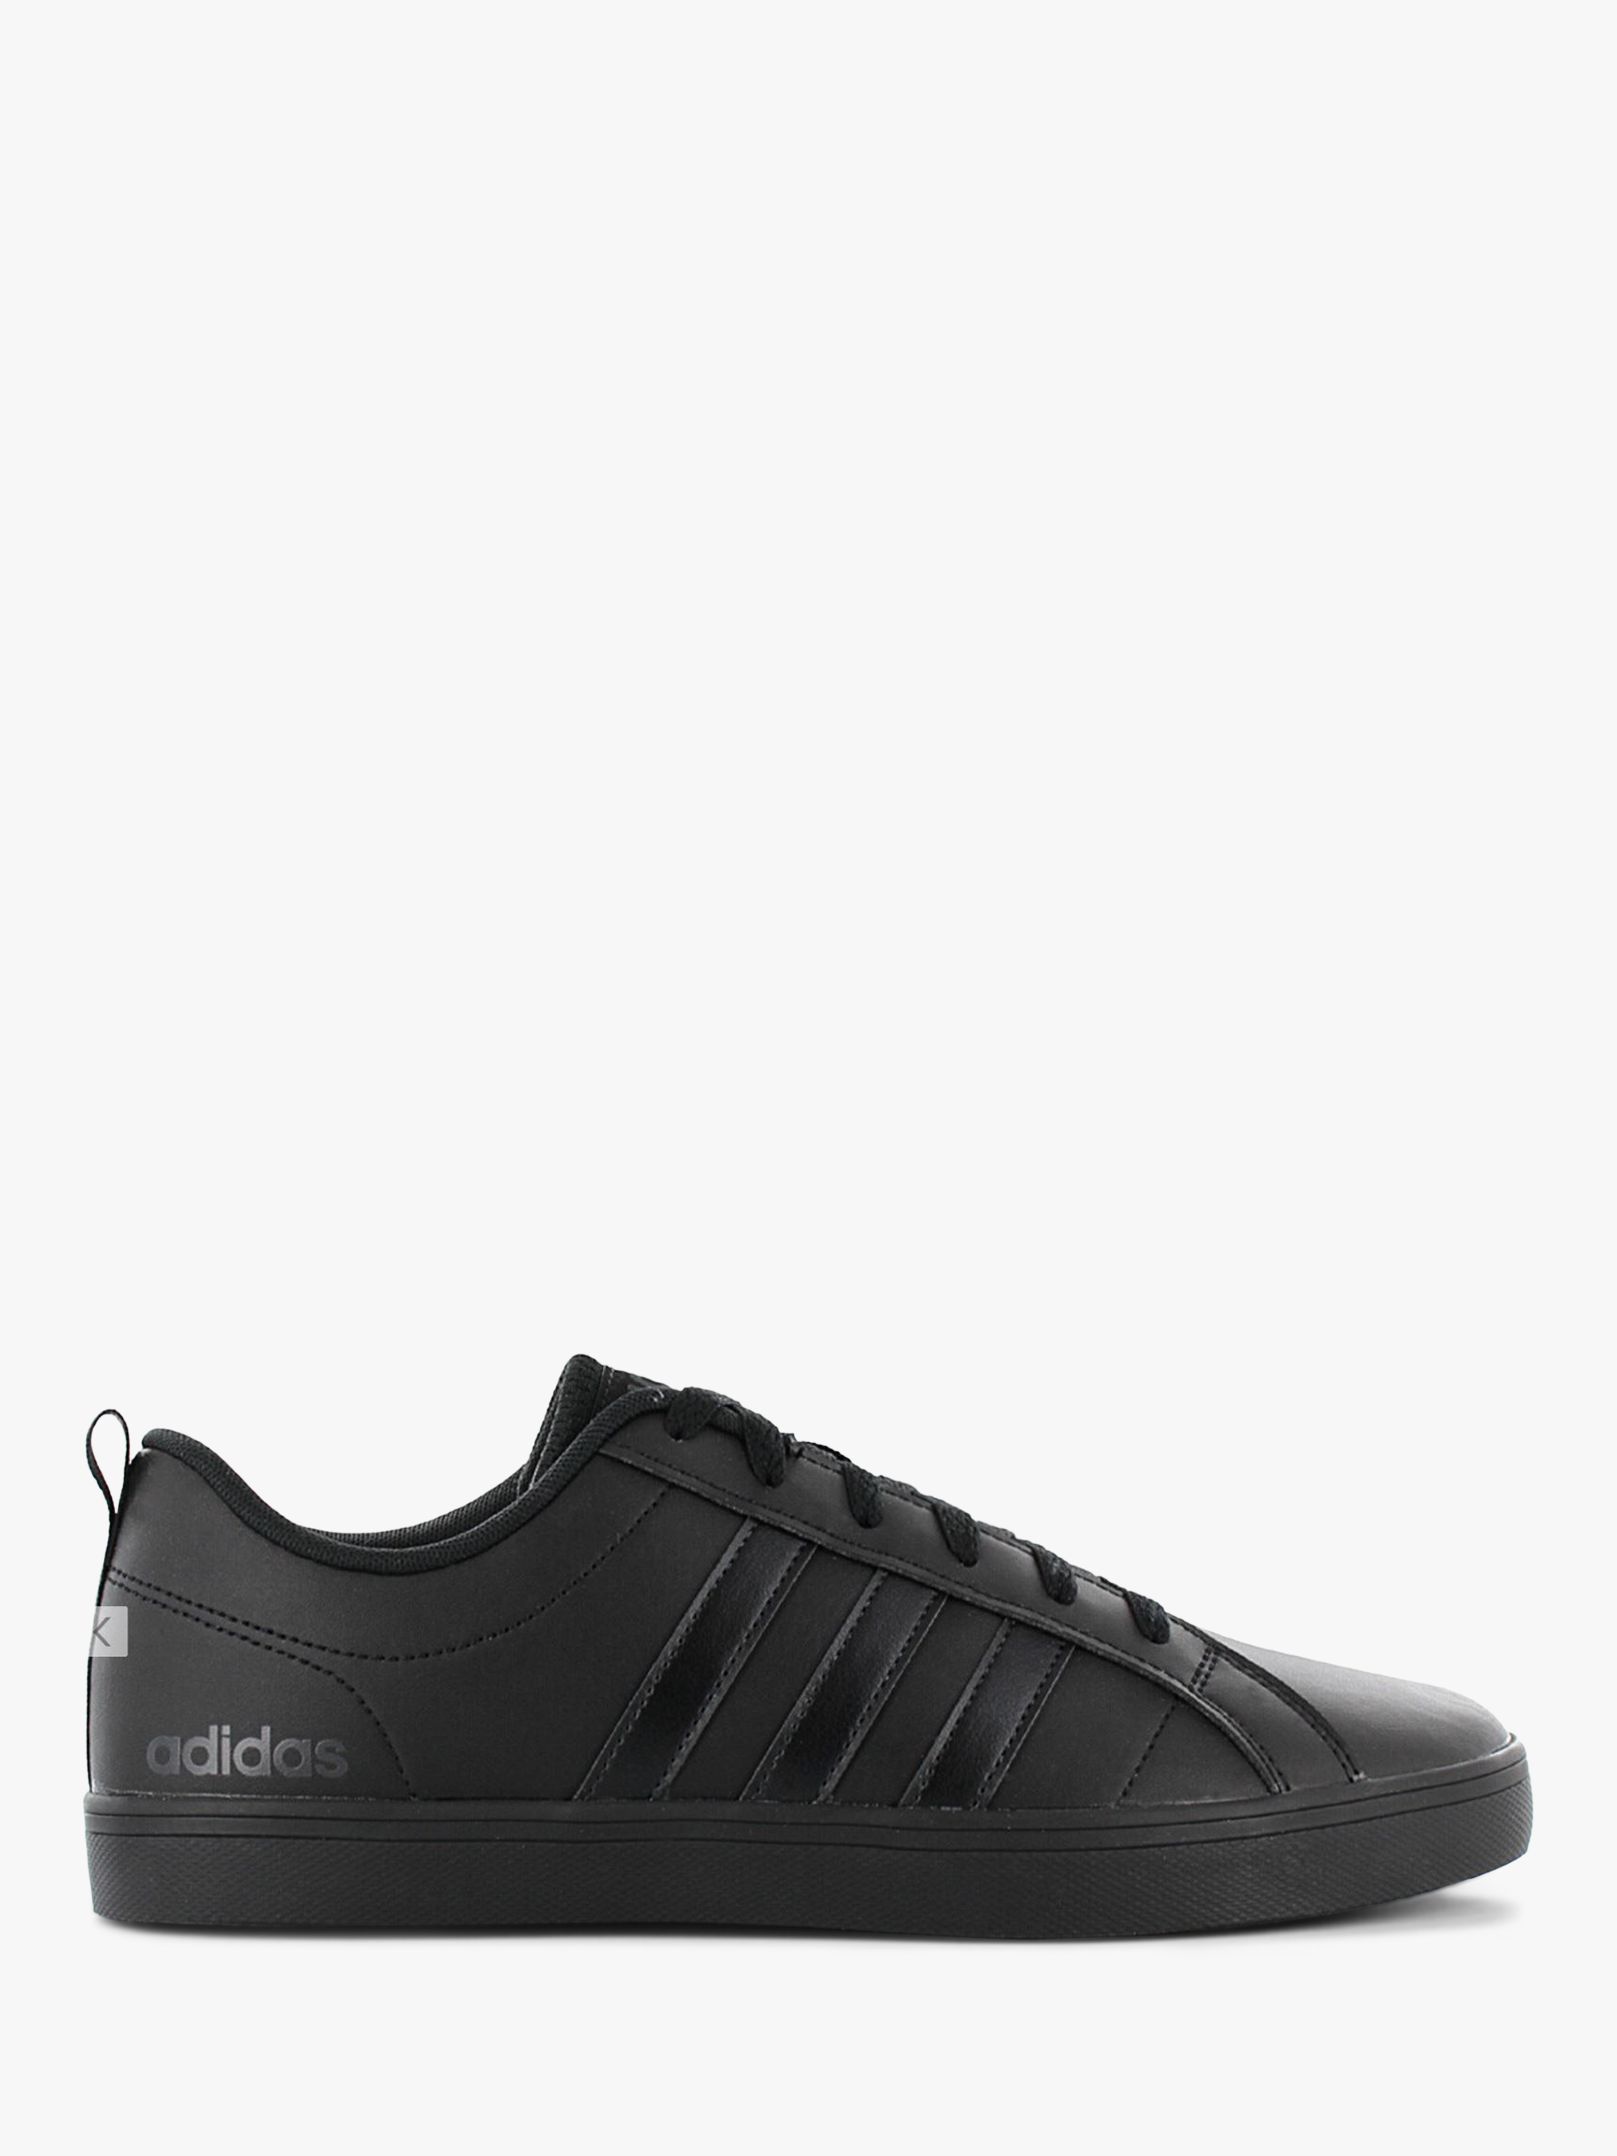 adidas VS Pace Trainers at John Lewis & Partners